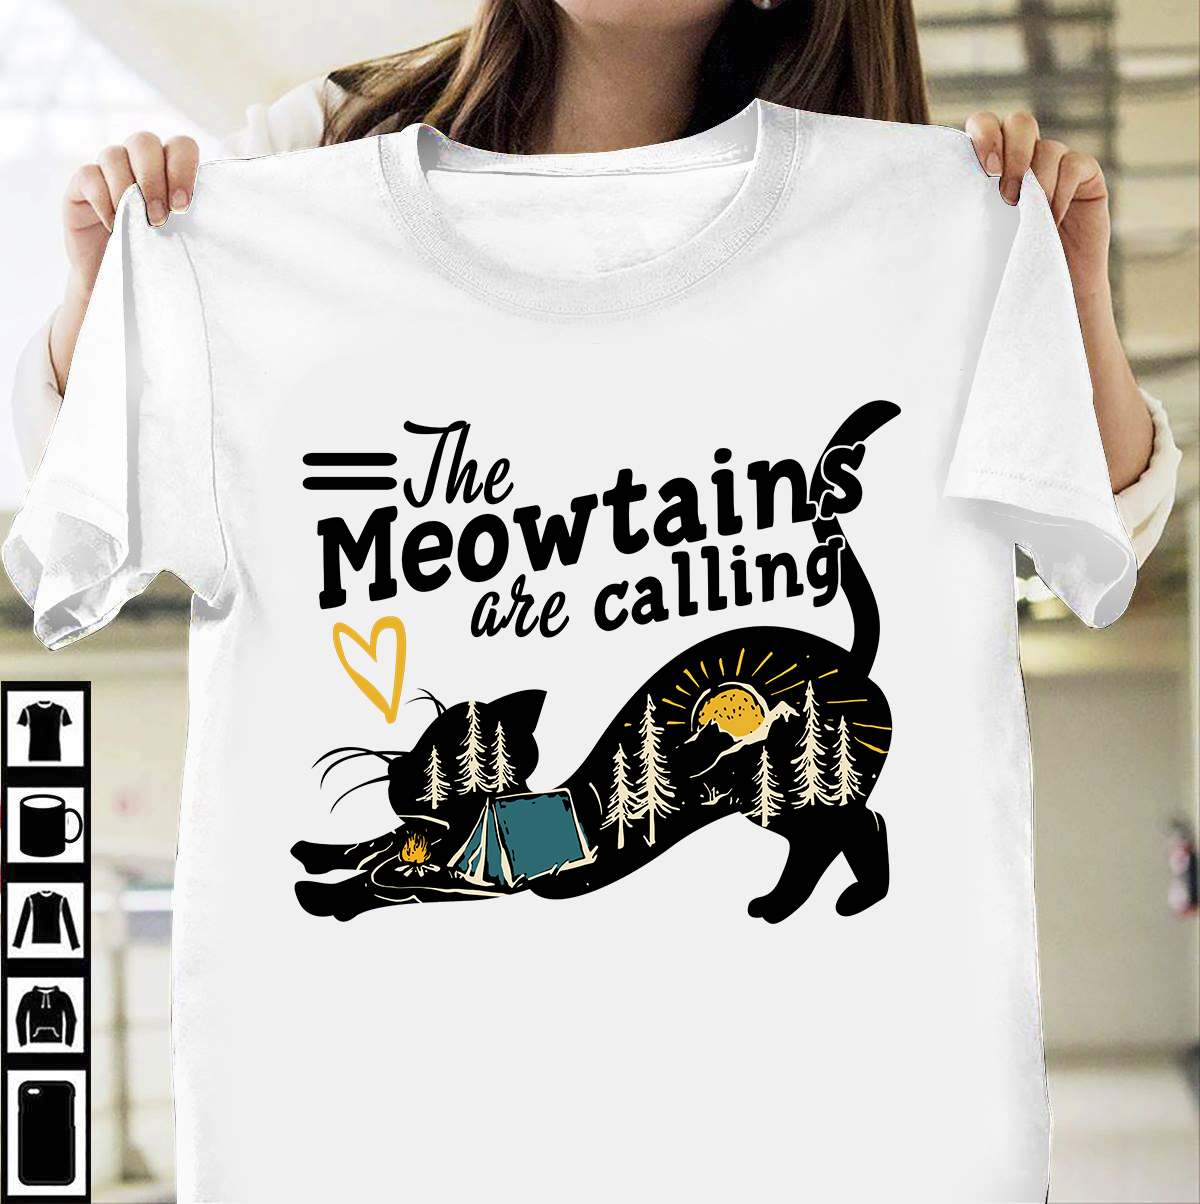 The meowtains are calling - Love camping under mountain, cat lover T-shirt